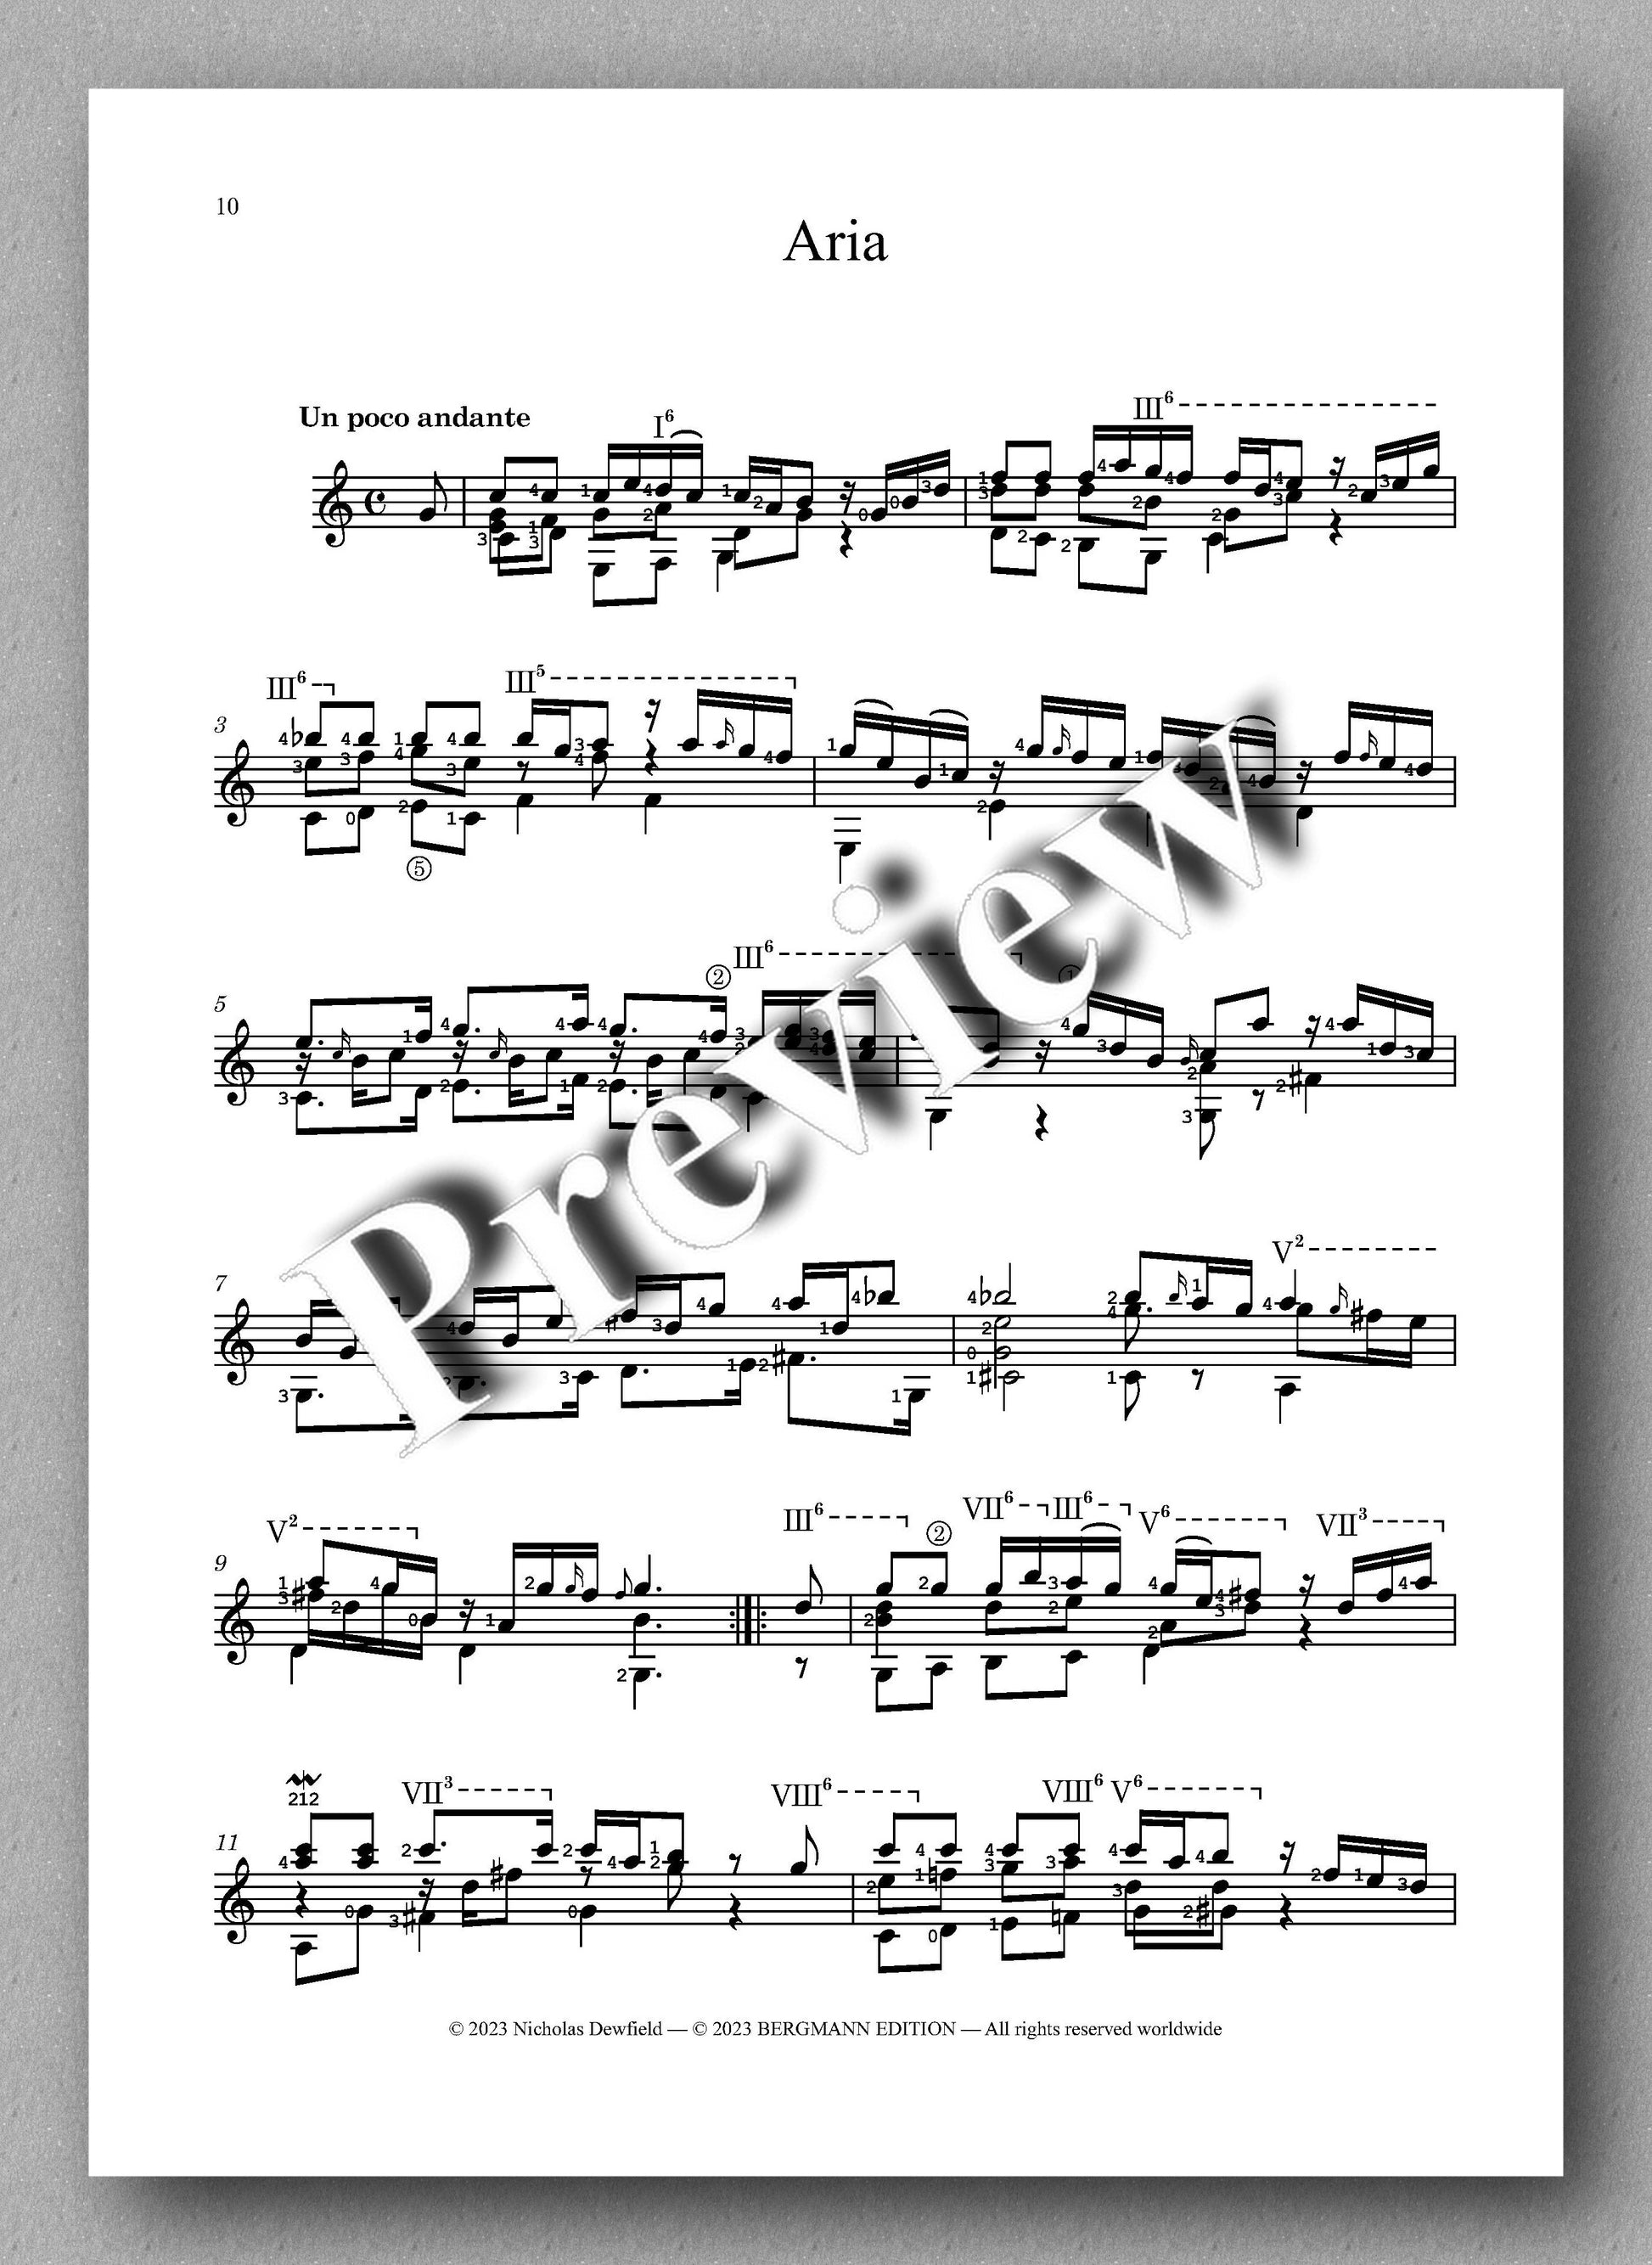 Sylvius Leopold Weiss (1687-1750), Sonata No. 24 - preview of the music score 3